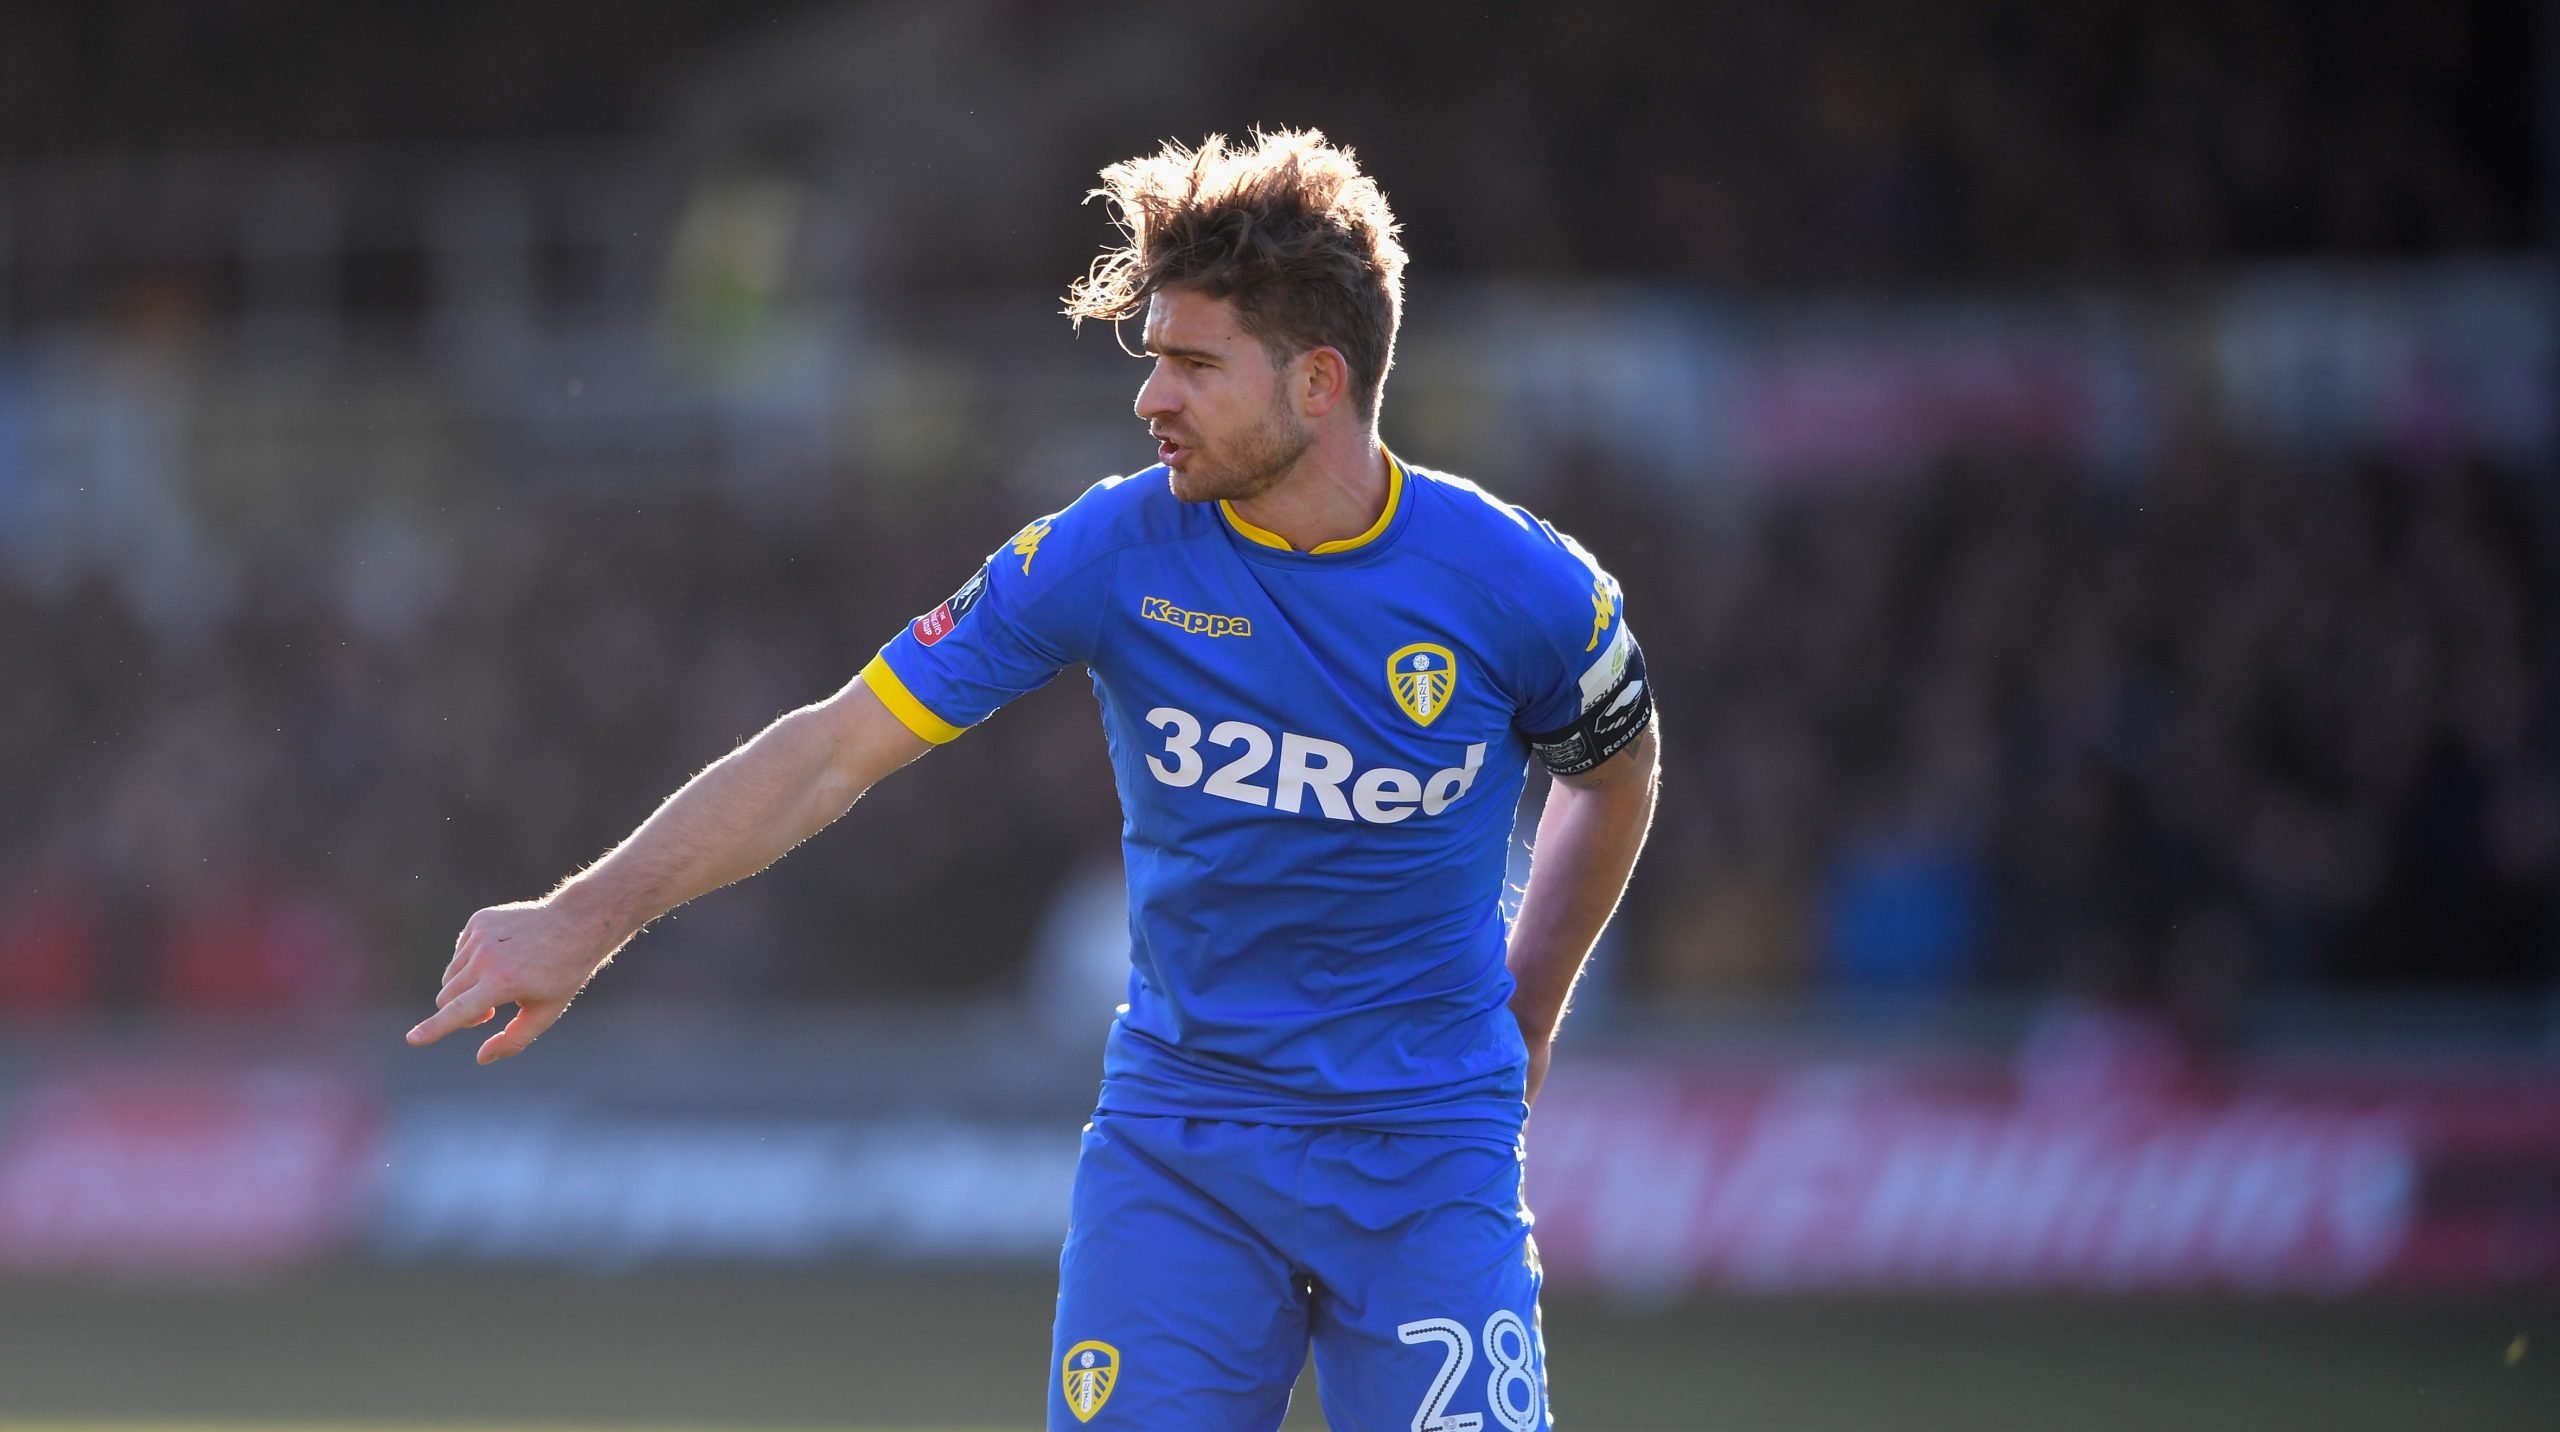 NEWPORT, WALES - JANUARY 07:  Leeds captain Gaetano Berardi in action during The Emirates FA Cup Third Round match between Newport County and Leeds United at Rodney Parade on January 7, 2018 in Newport, Wales.  (Photo by Stu Forster/Getty Images)